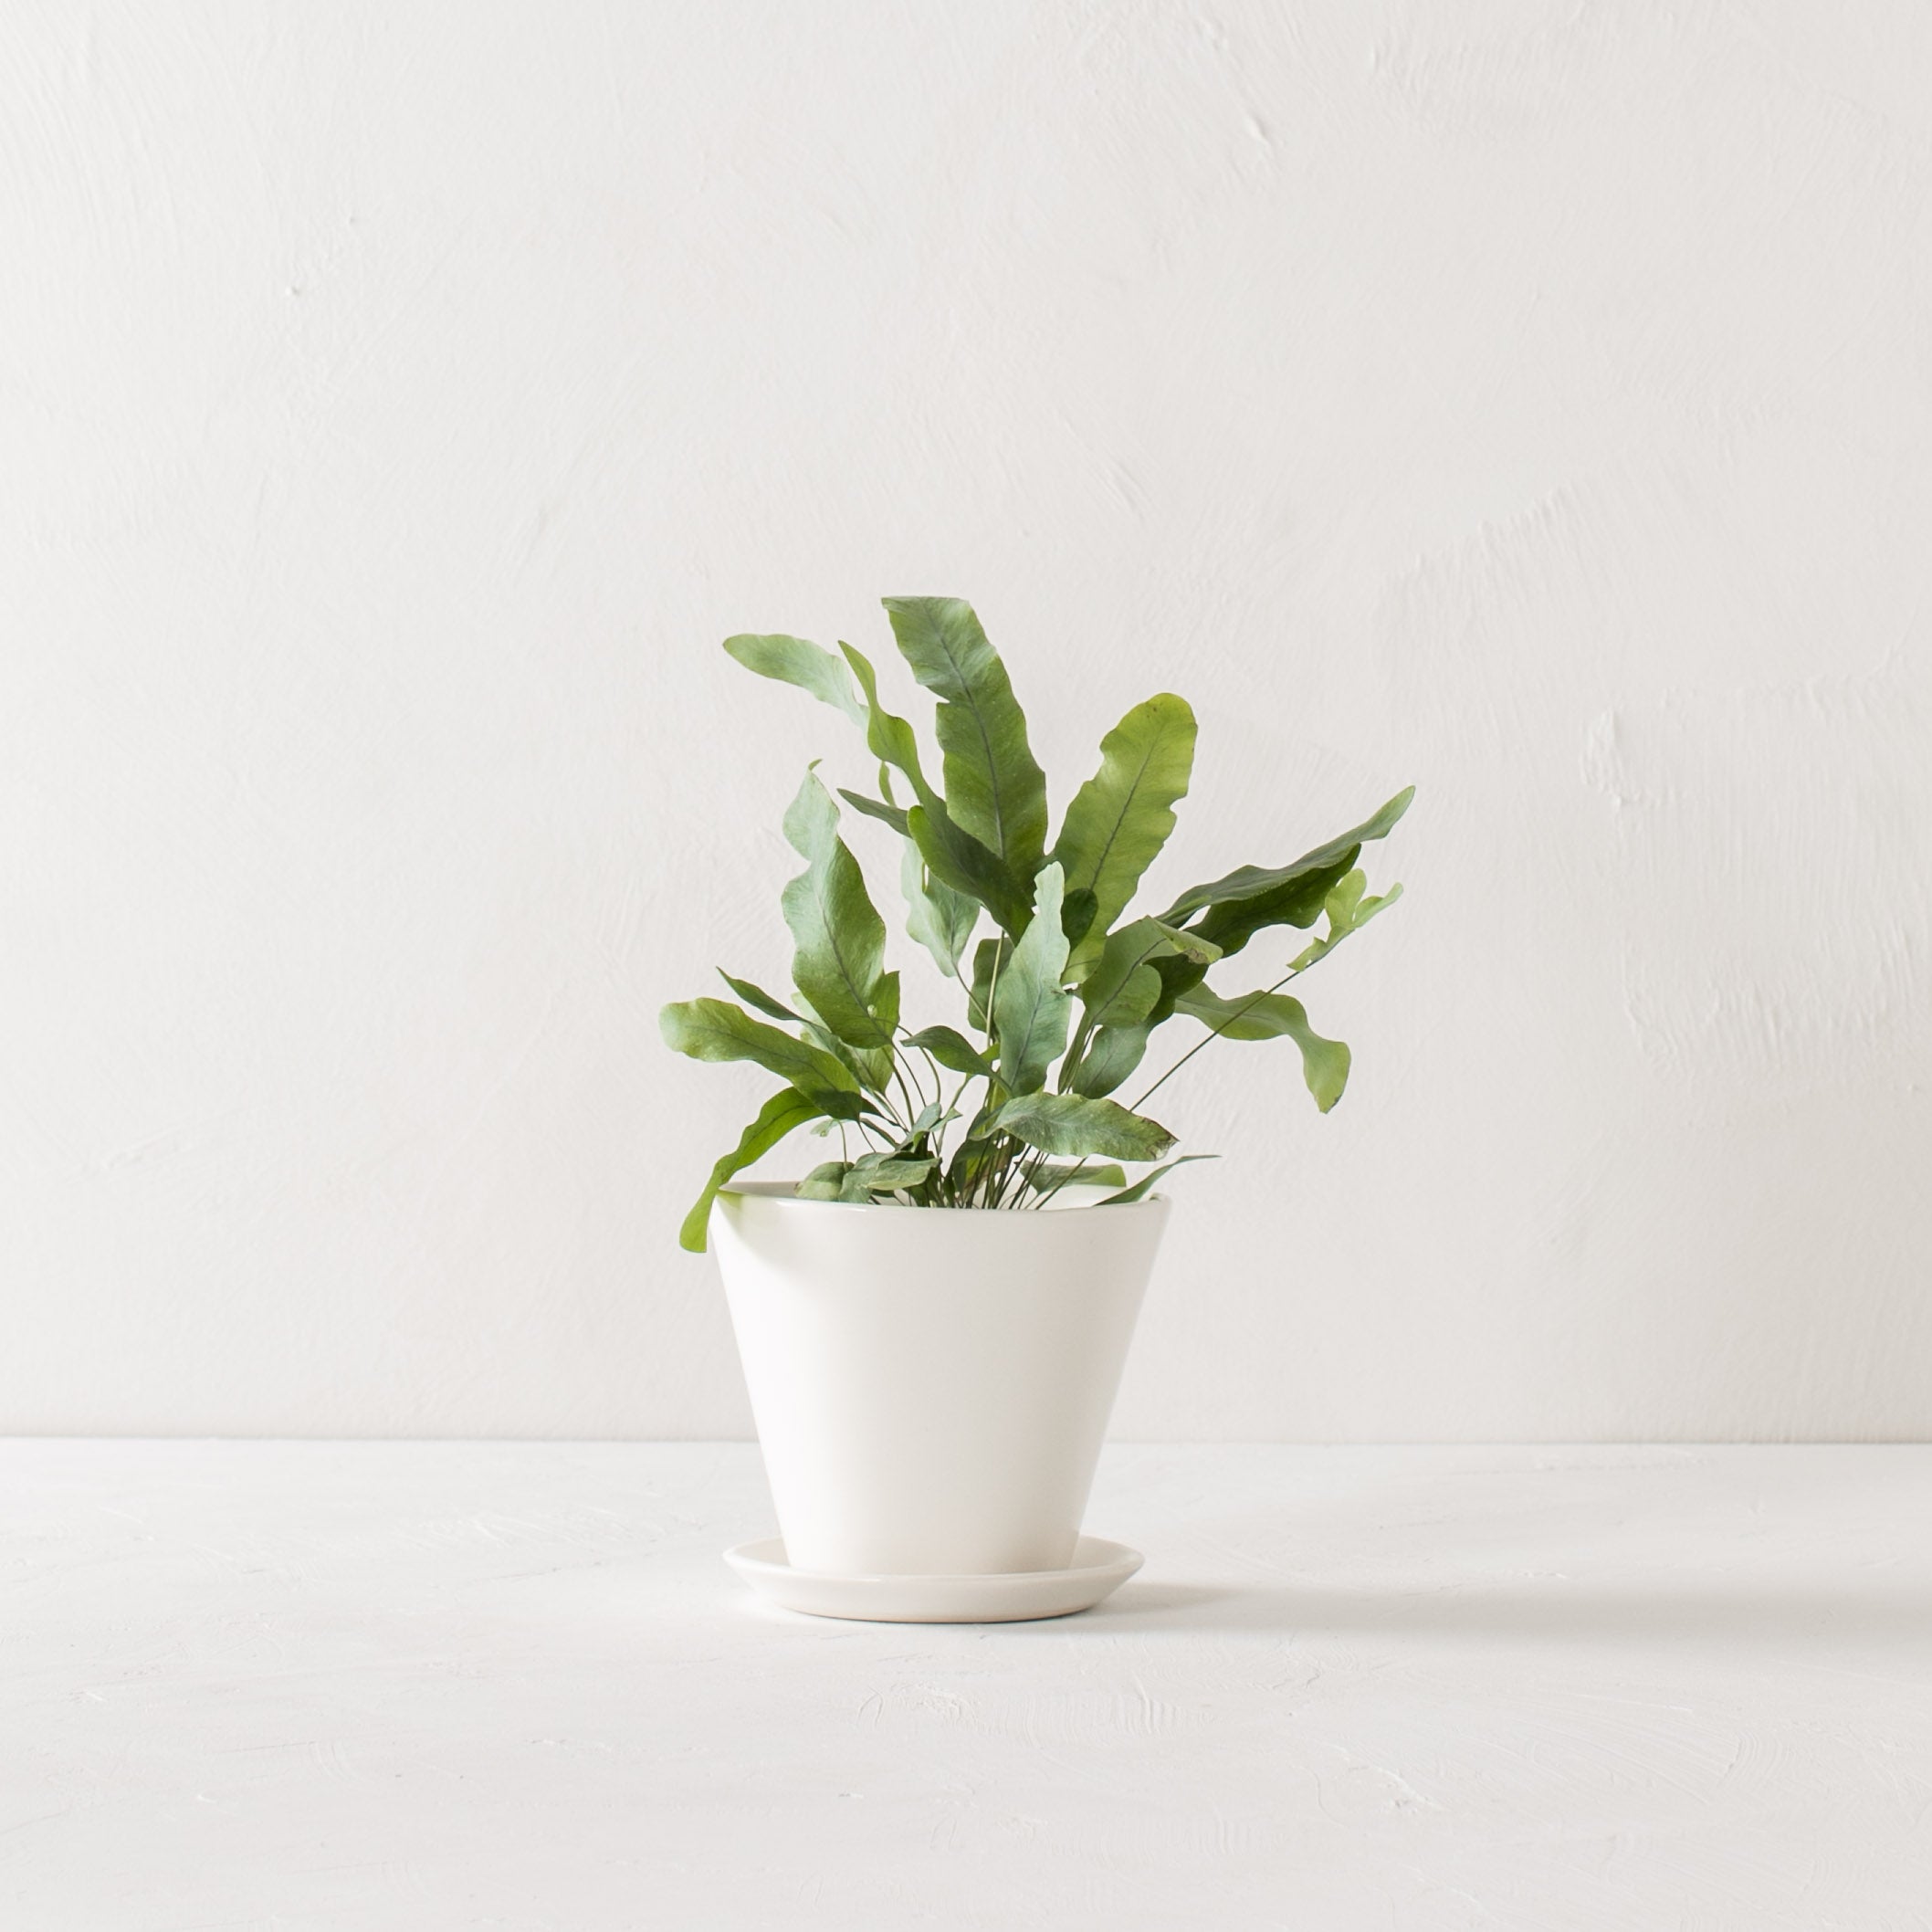 Minimal white 7 inch tapered planter with plant inside, as well as a bottom drainage dish. Designed by Convivial Production, sold by Shop Verdant Kansas City plant store.